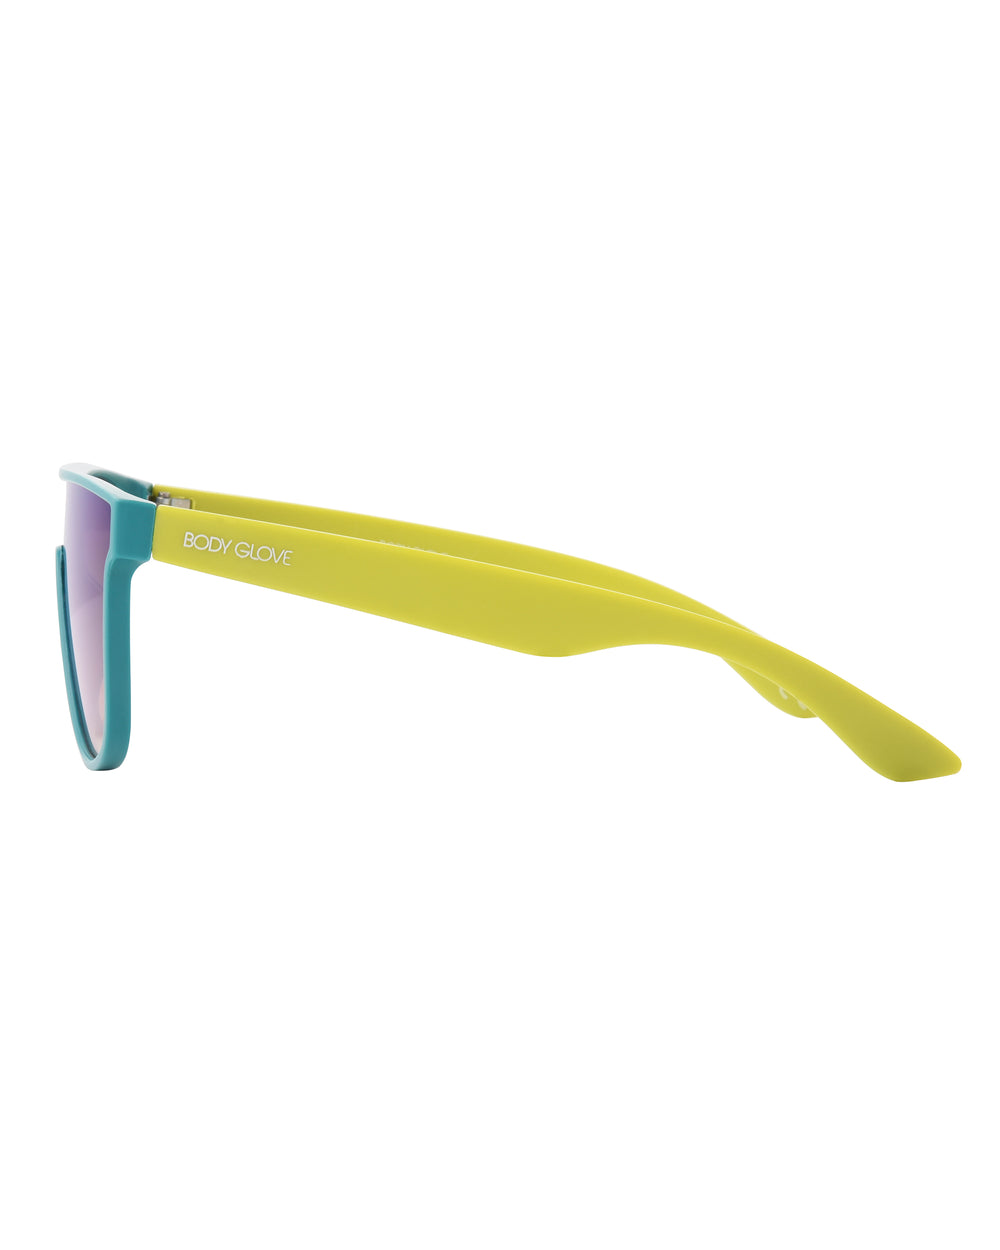 Toby Shield-Shaped Sunglasses - Teal